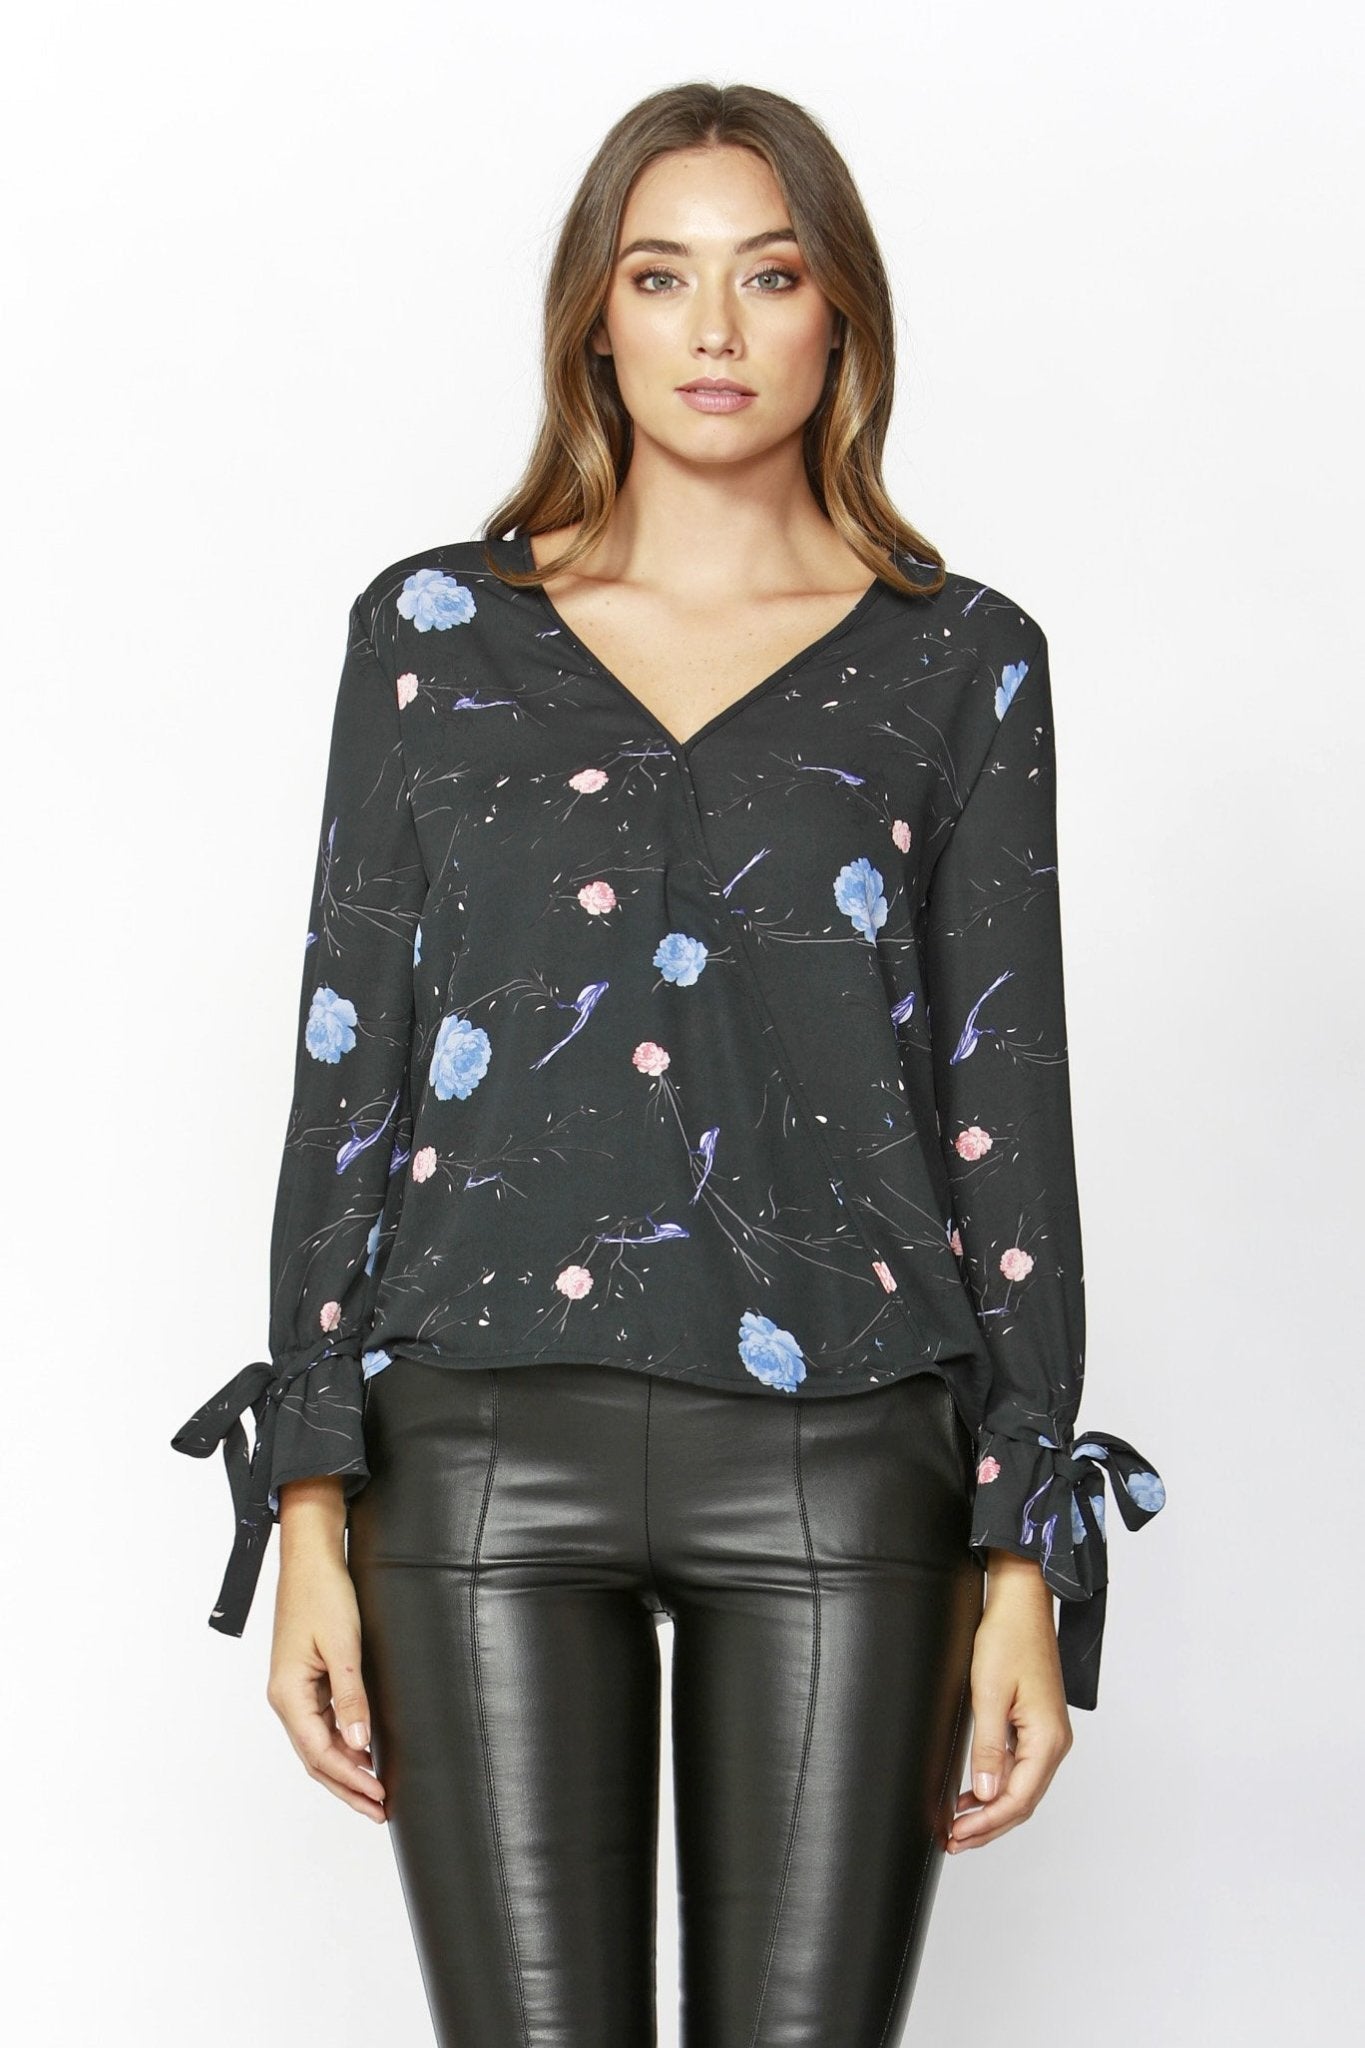 Sass Birds in the Night Wrap Blouse in Charcoal Grey - Hey Sara